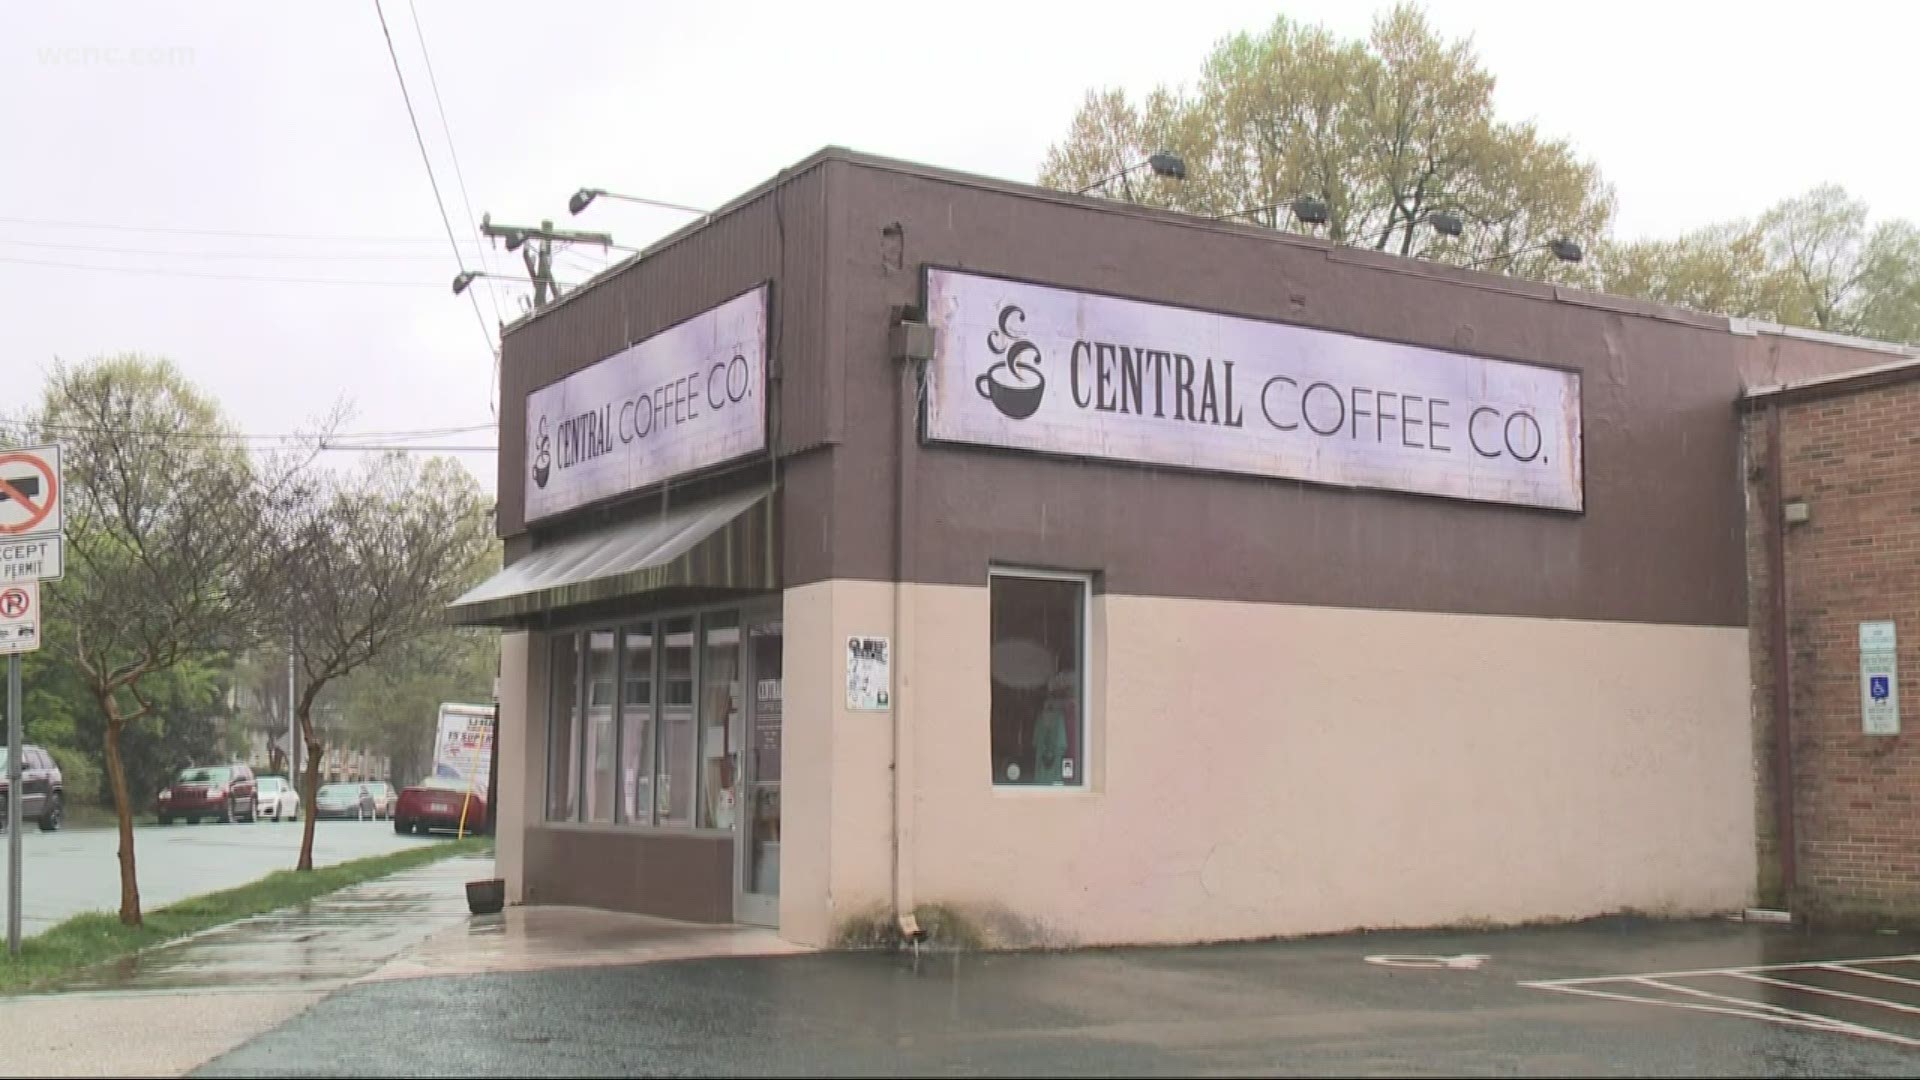 Businesses and restaurants across the Charlotte-area that haven't closed due to COVID-19 are having to drastically change their workflow to adapt.